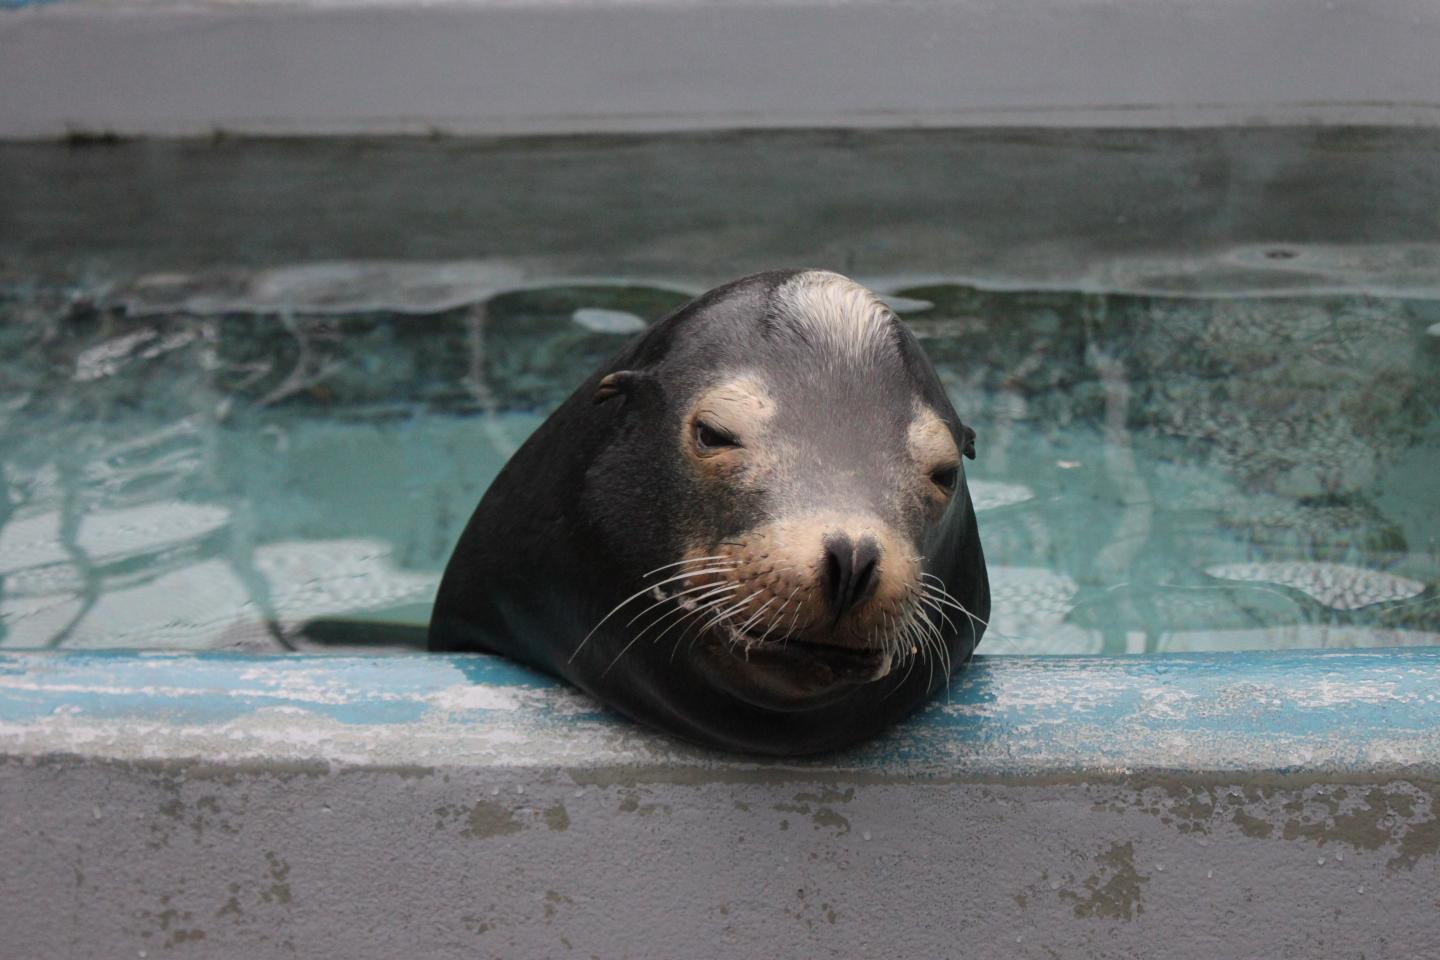 California sea lion Blarney McCresty was treated for domoic acid toxicity during his rehabilitation at the Marine Mammal Center in Sausalito. Photo © The Marine Mammal Center